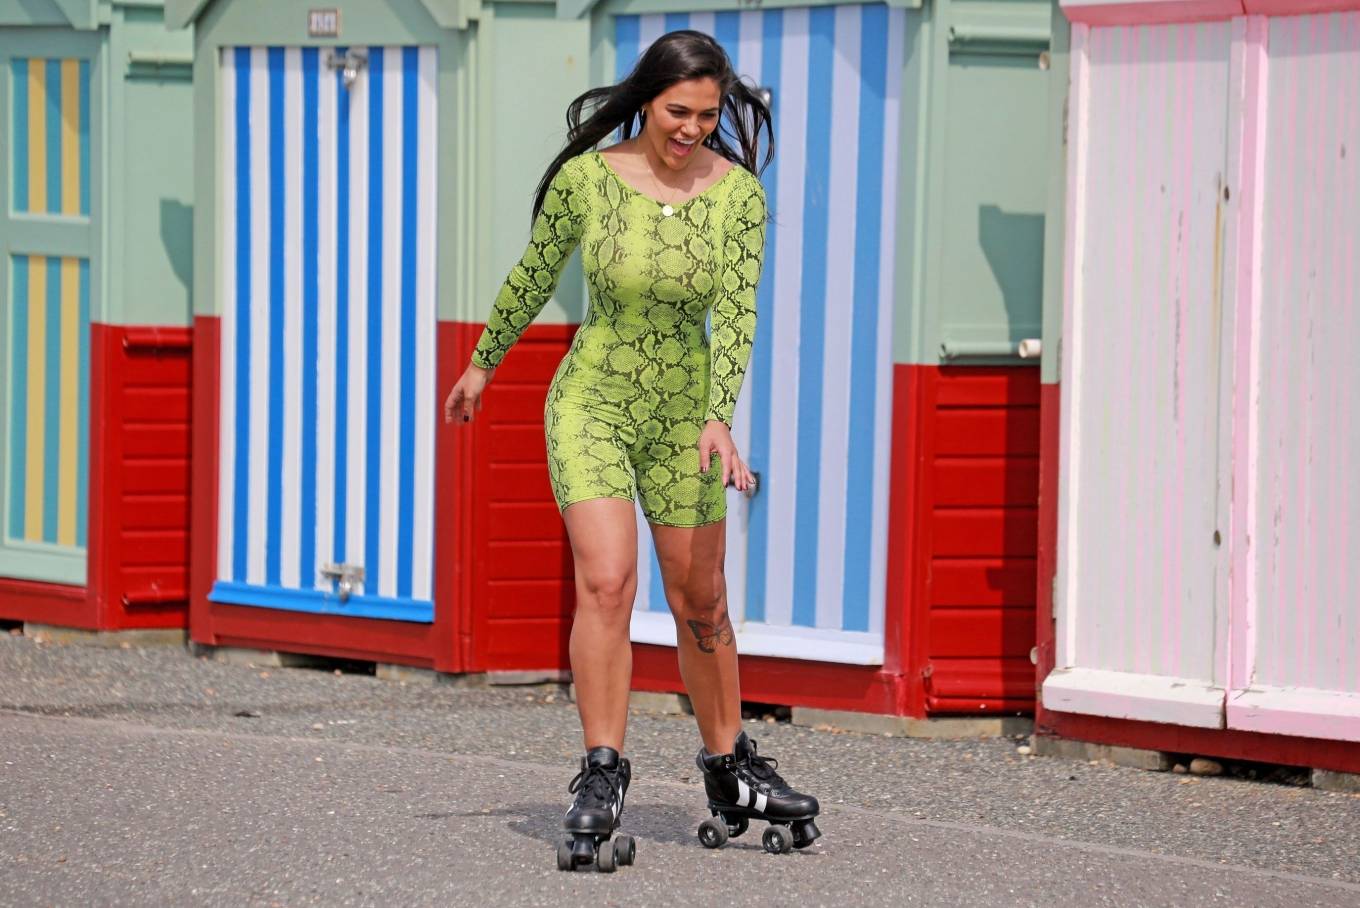 Lydia Clyma - Rollerblading in a green snakeskin outfit in Portsmouth. 